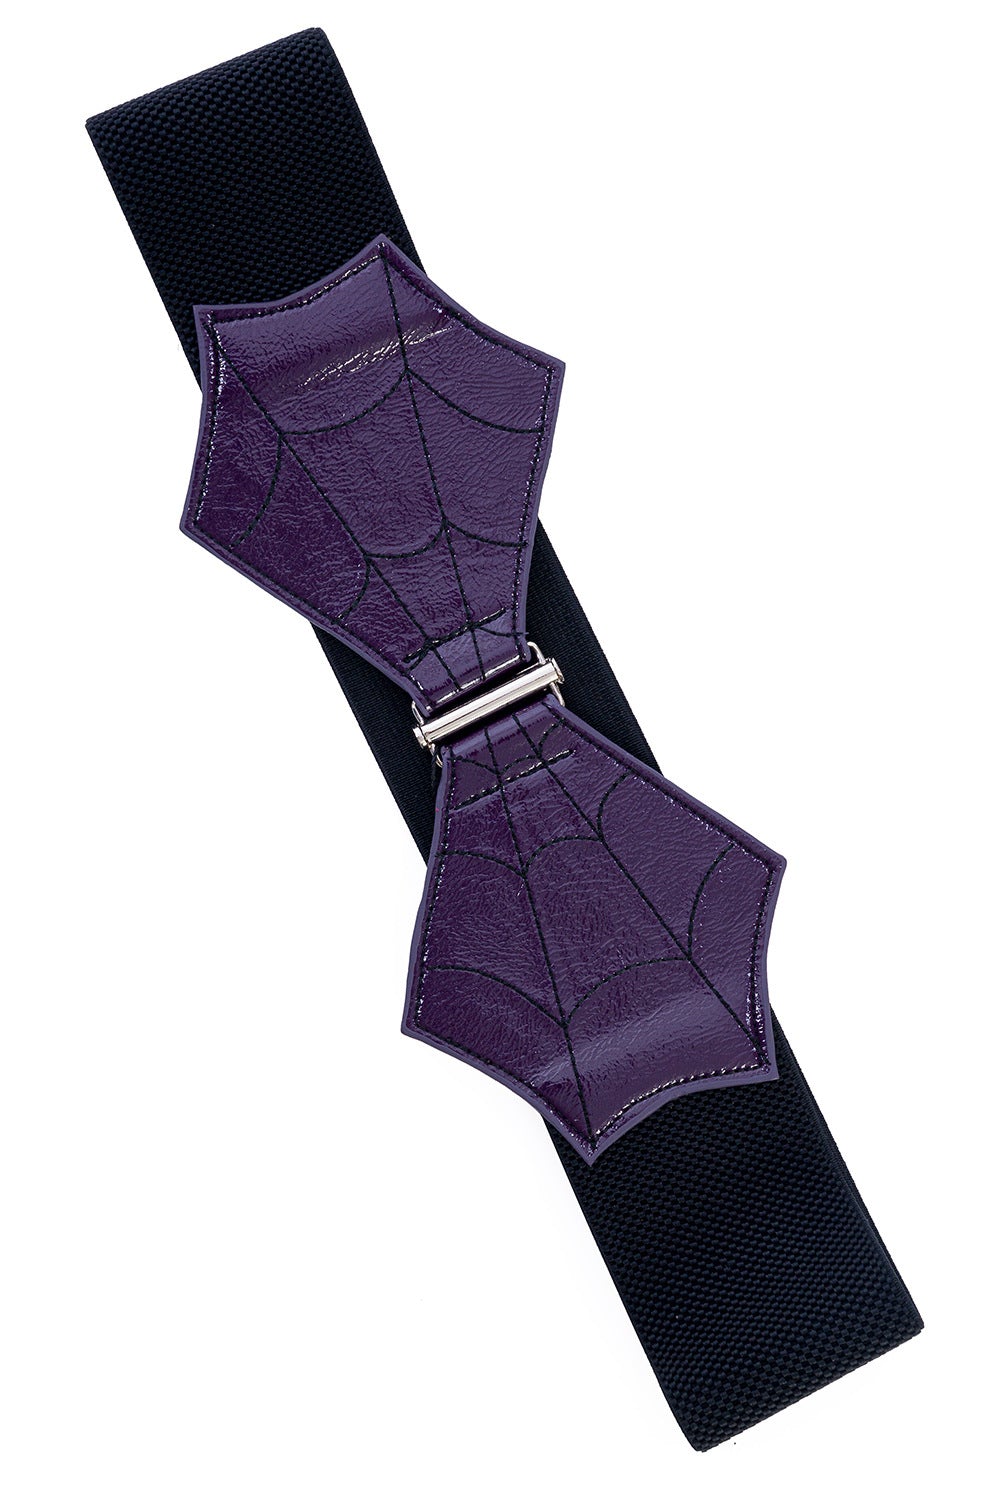 Black belt with bat with details in purple